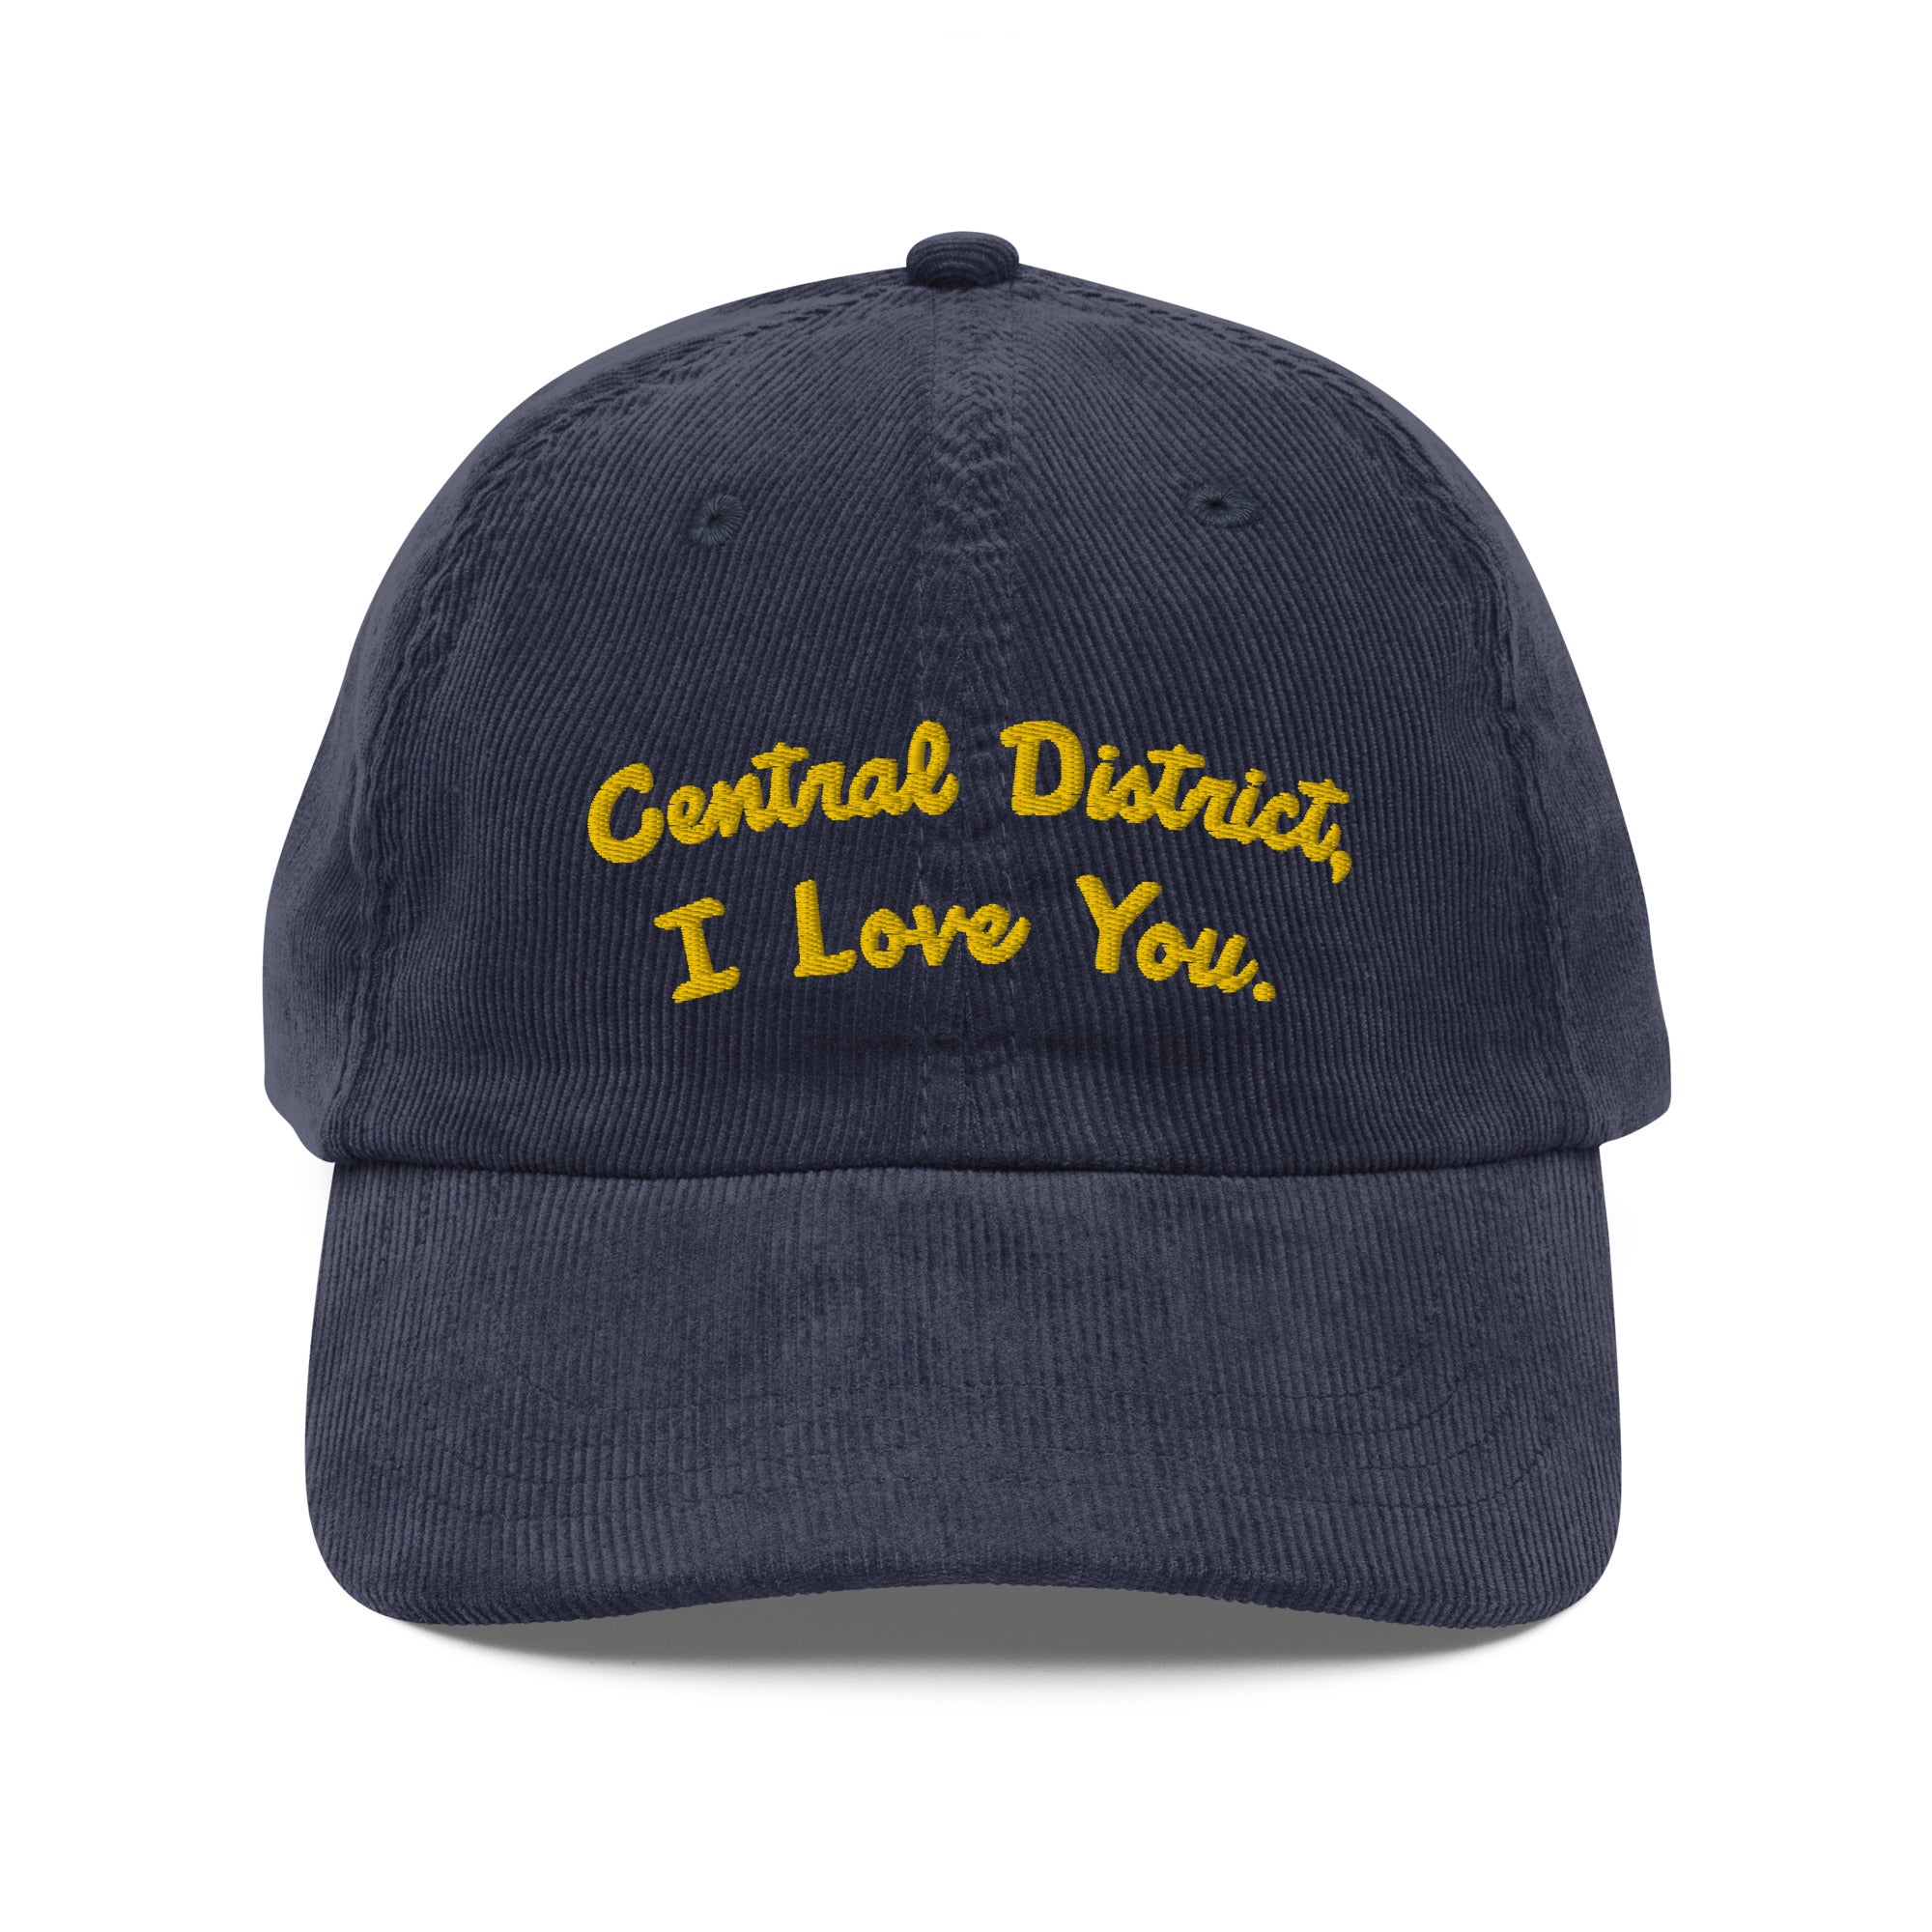 I Love You Corduroy Hat - Central District | Seattle, WA